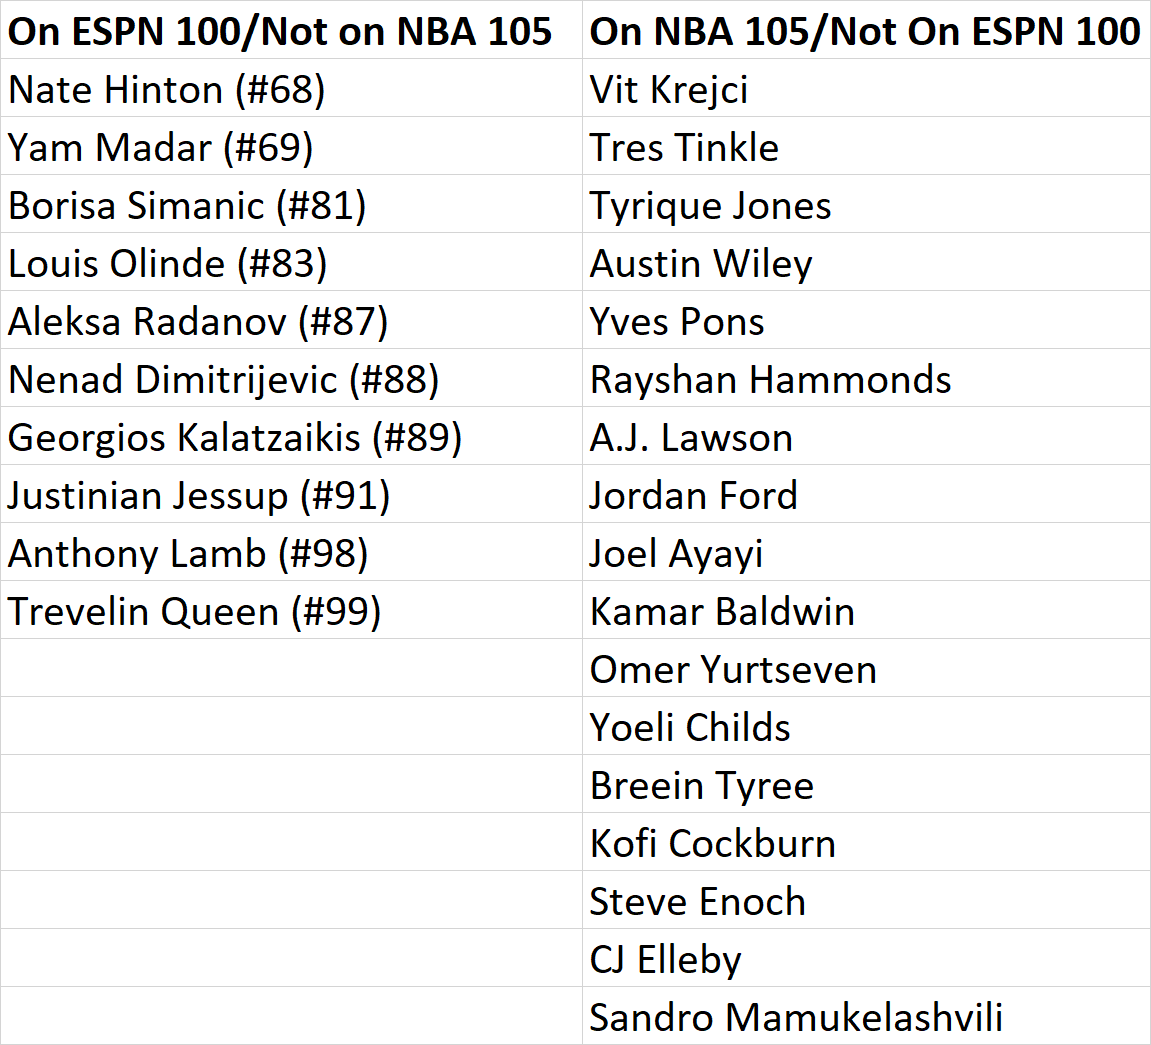 Not much disagreement between ESPN and the NBA on the Top-90 prospects in the draft, which is good to see. The only exception among Americans is Houston's Nate Hinton (#68 on ESPN 100), who NBA teams may have been surprised to see stay in the draft, or perhaps we're too high on?